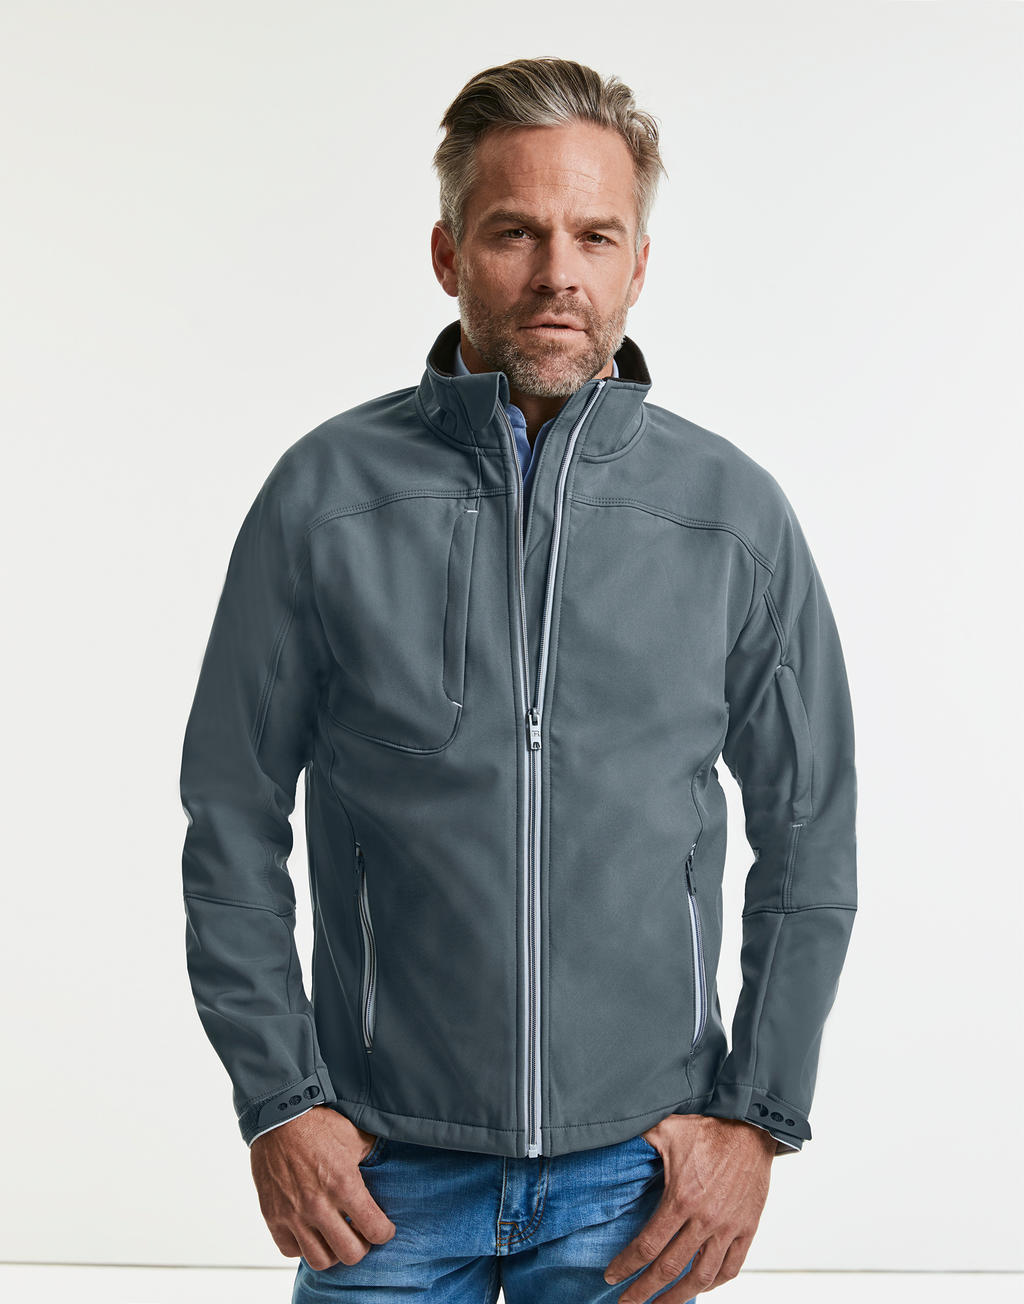  Mens Bionic Softshell Jacket in Farbe Stone